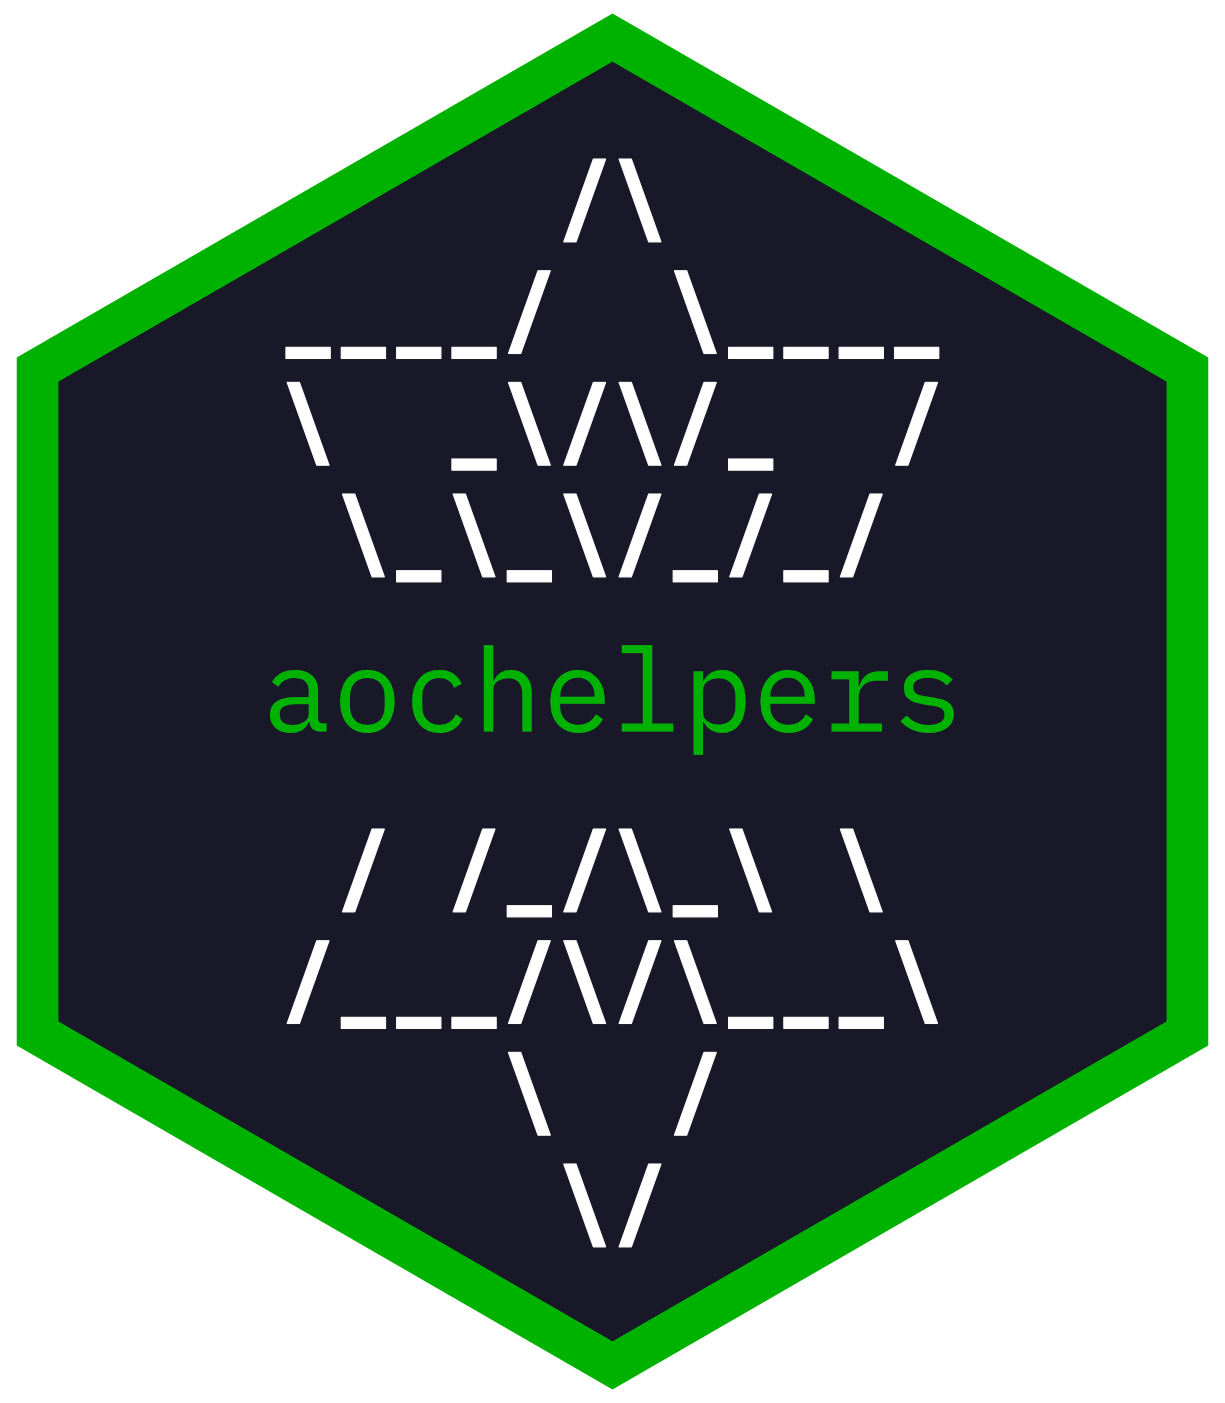 aochelpers hex sticker, with a bright green outline and a dark background. The hex is filled with a white ASCII art star, with the word aochelpers in bright green in the middle.
